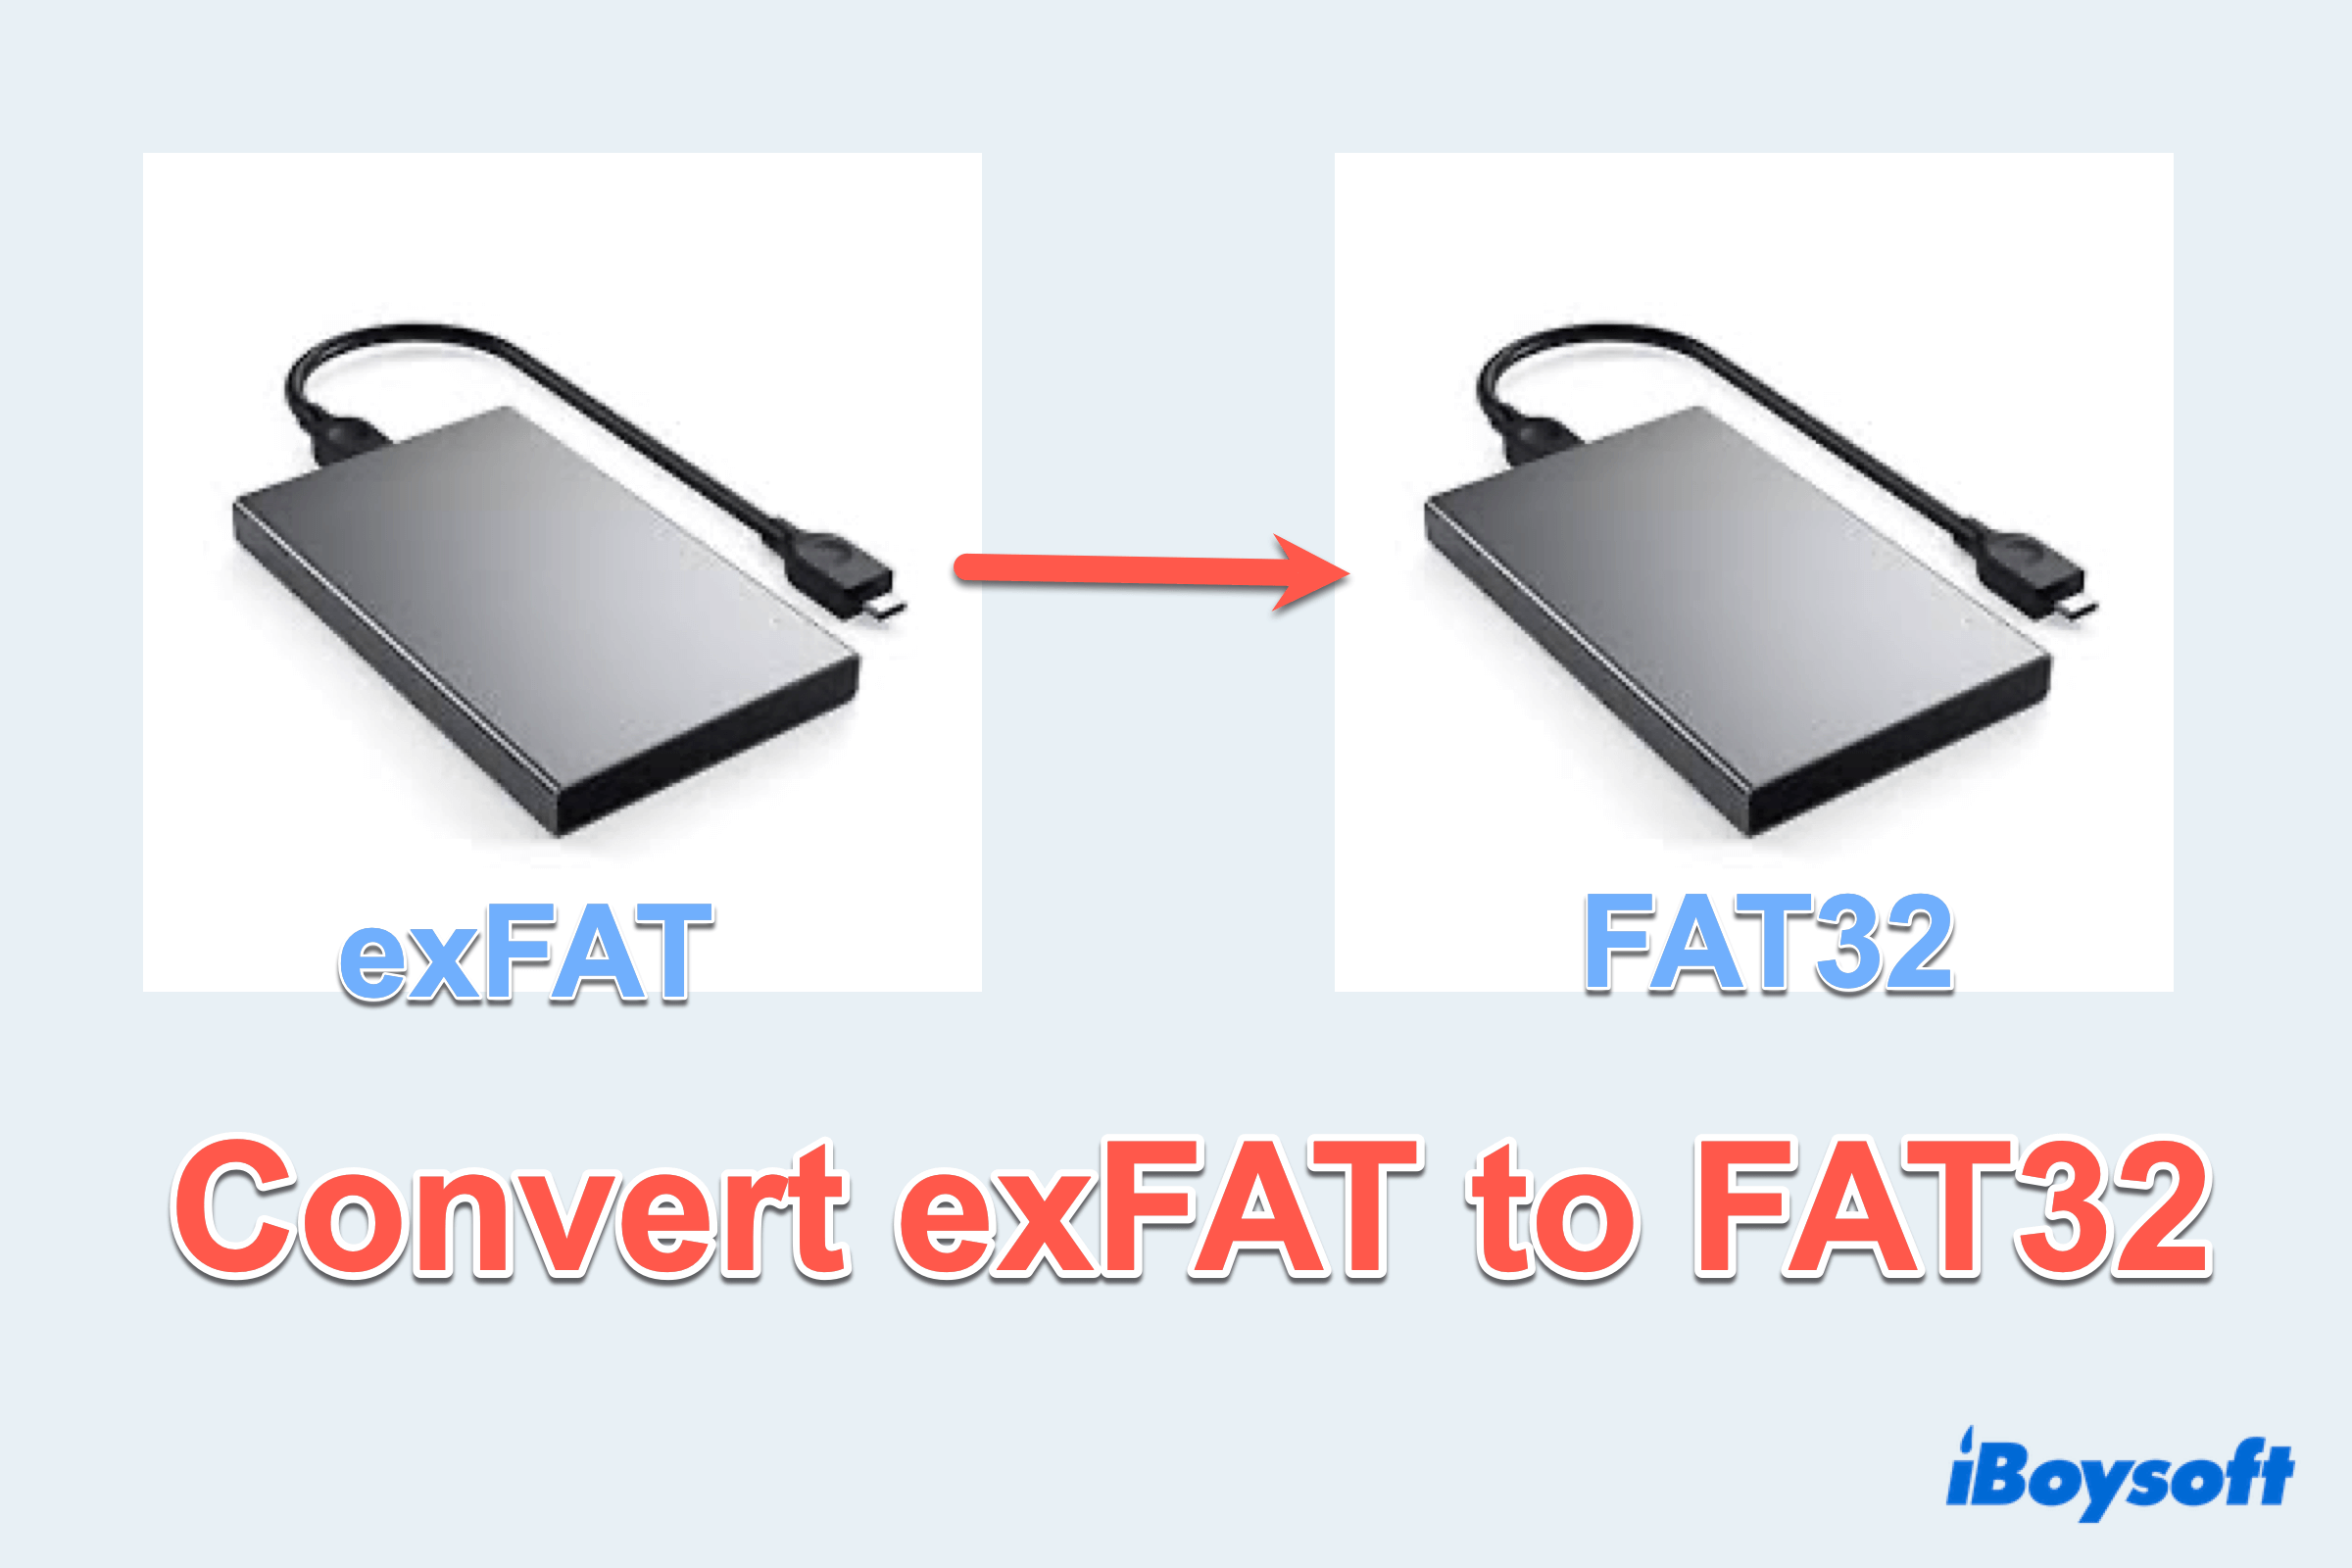 Summary of exFAT to FAT32